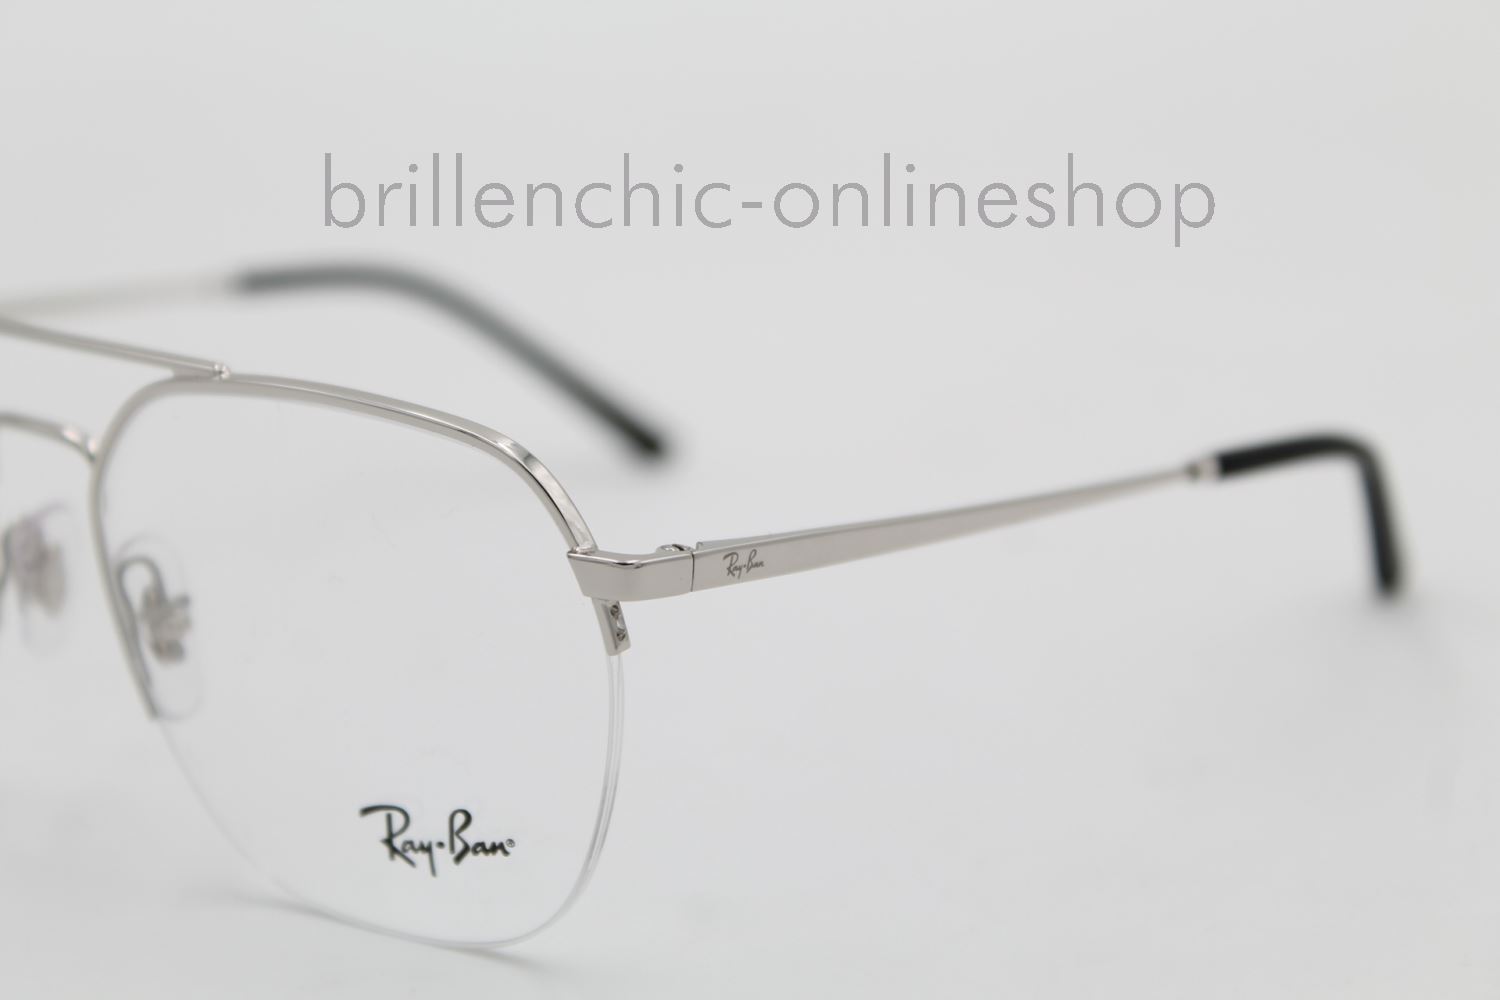 Brillenchic-onlineshop in Berlin - Ray Ban RB 6444 2501 